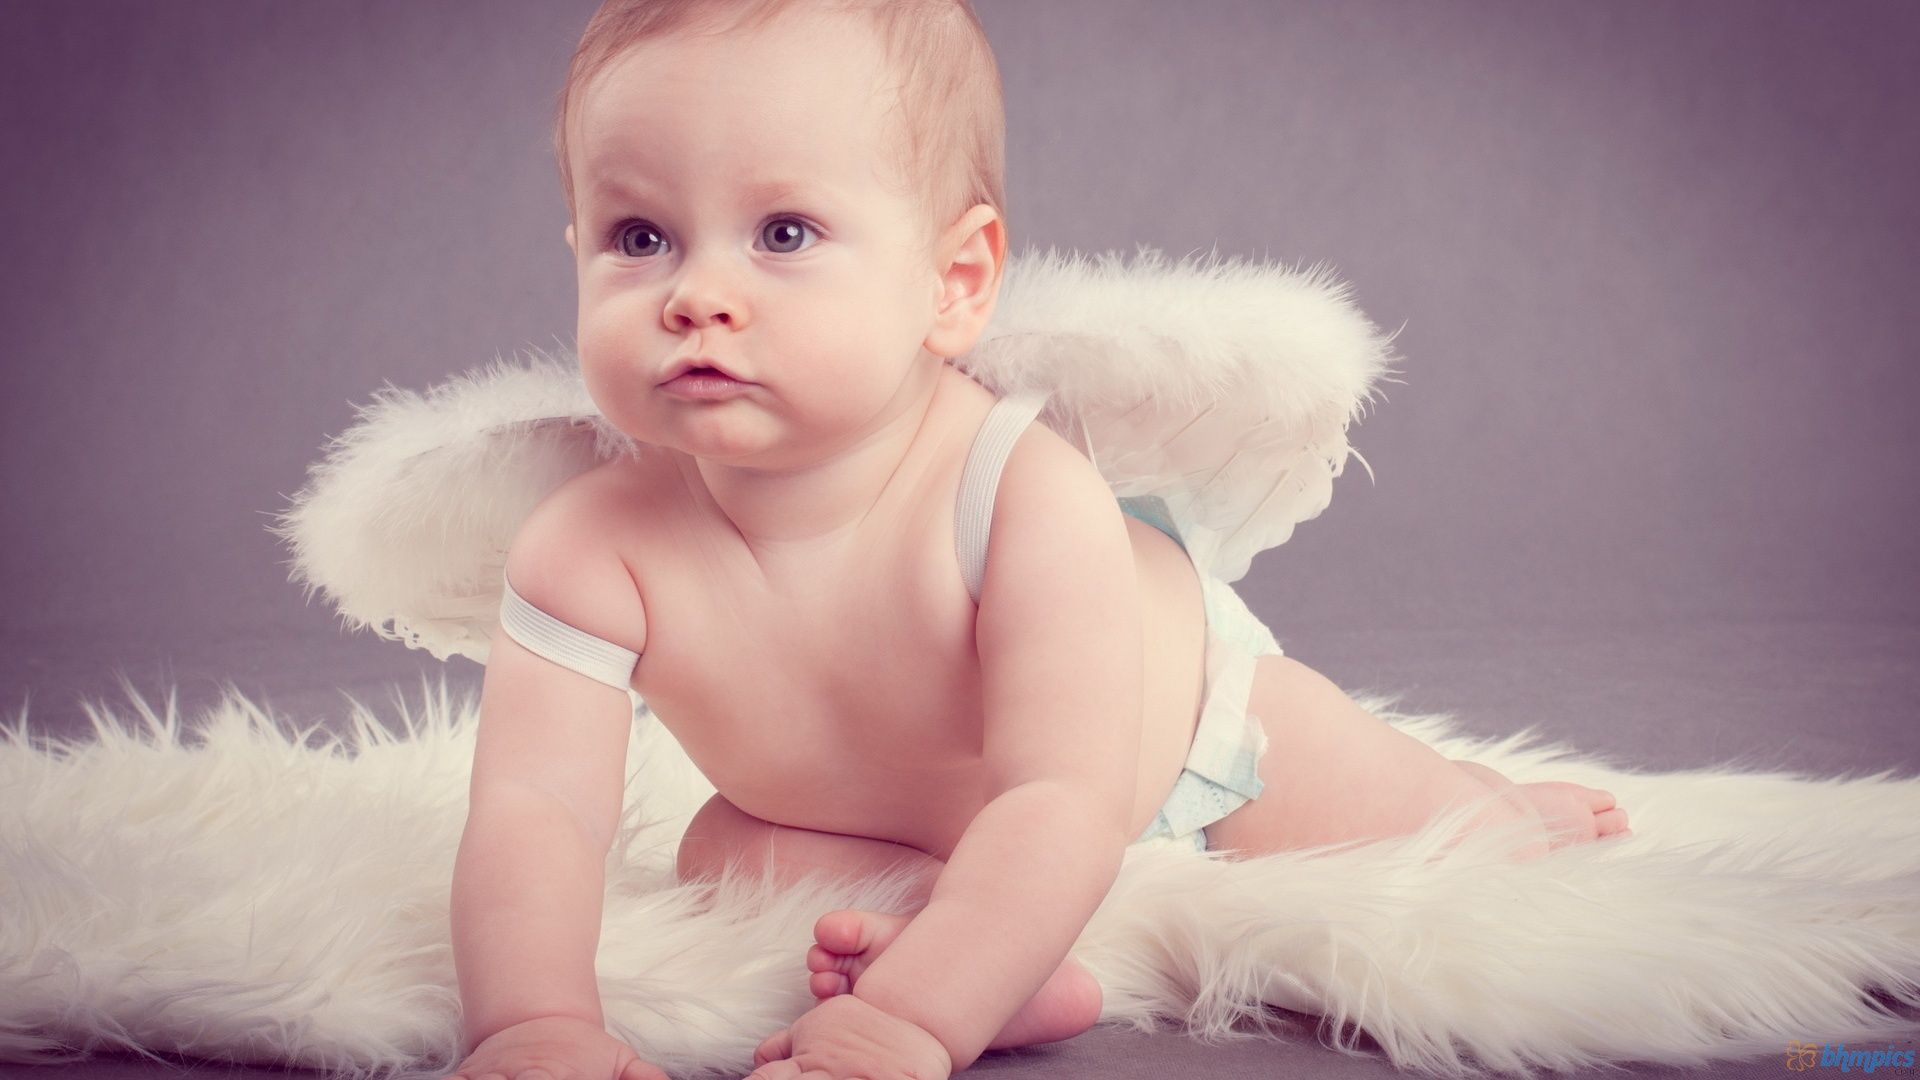 Angel Baby Girls Wallpapers